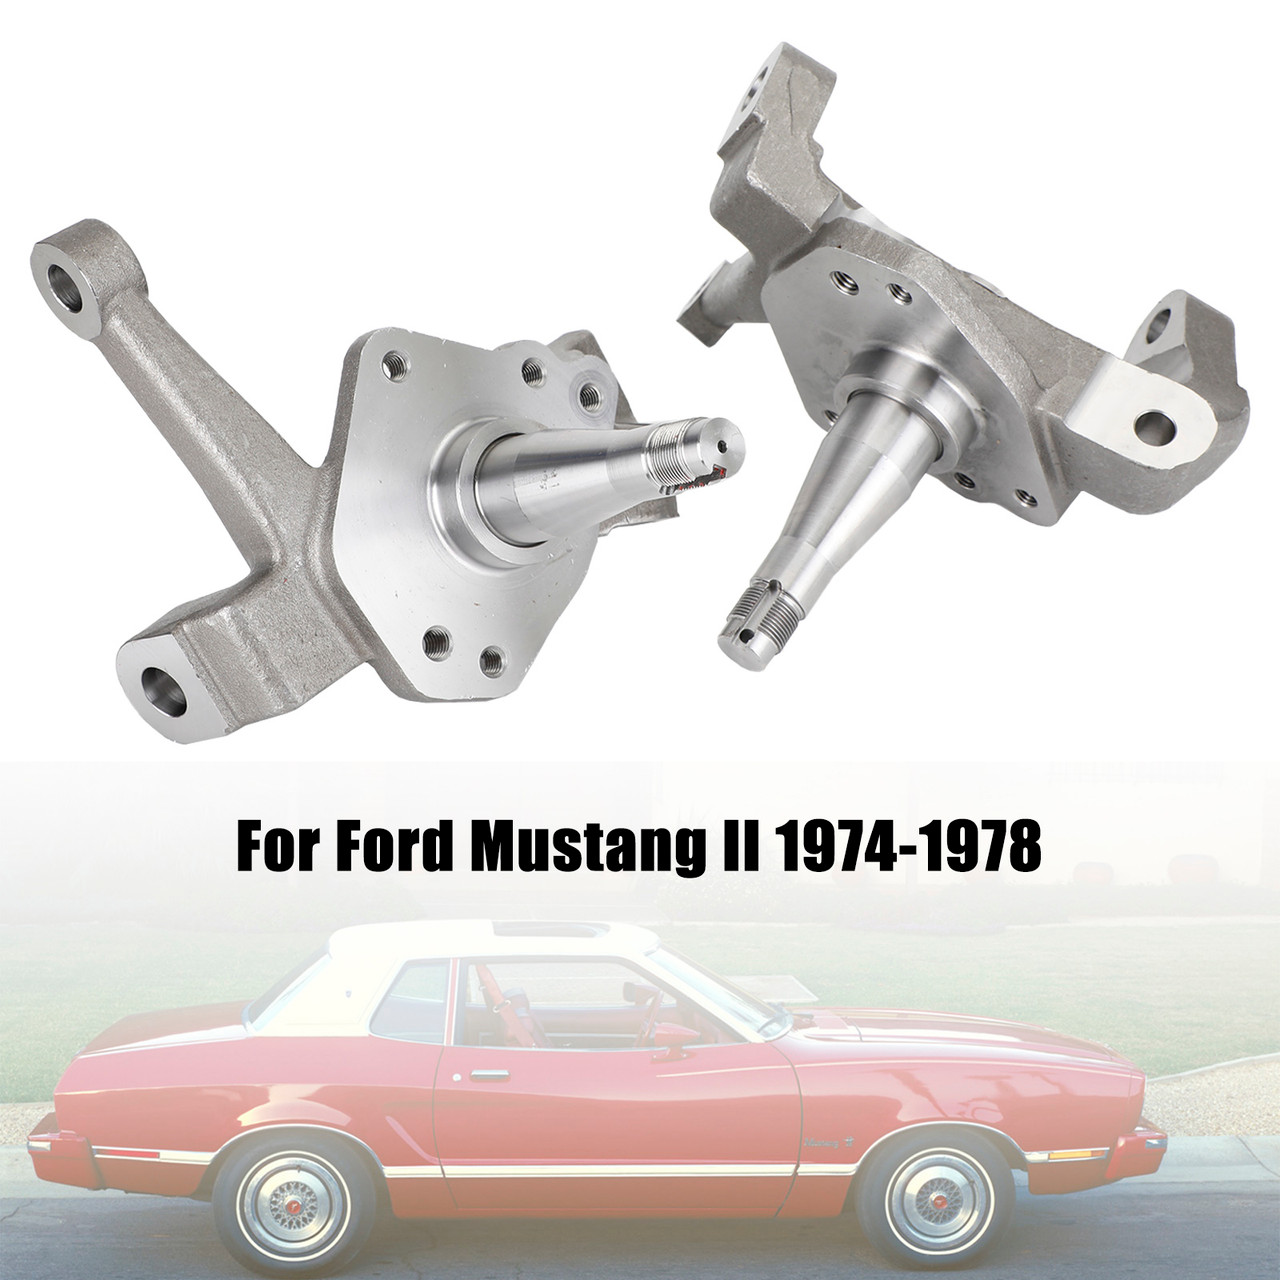 1974-1978 Ford Mustang II 2" Drop Spindles